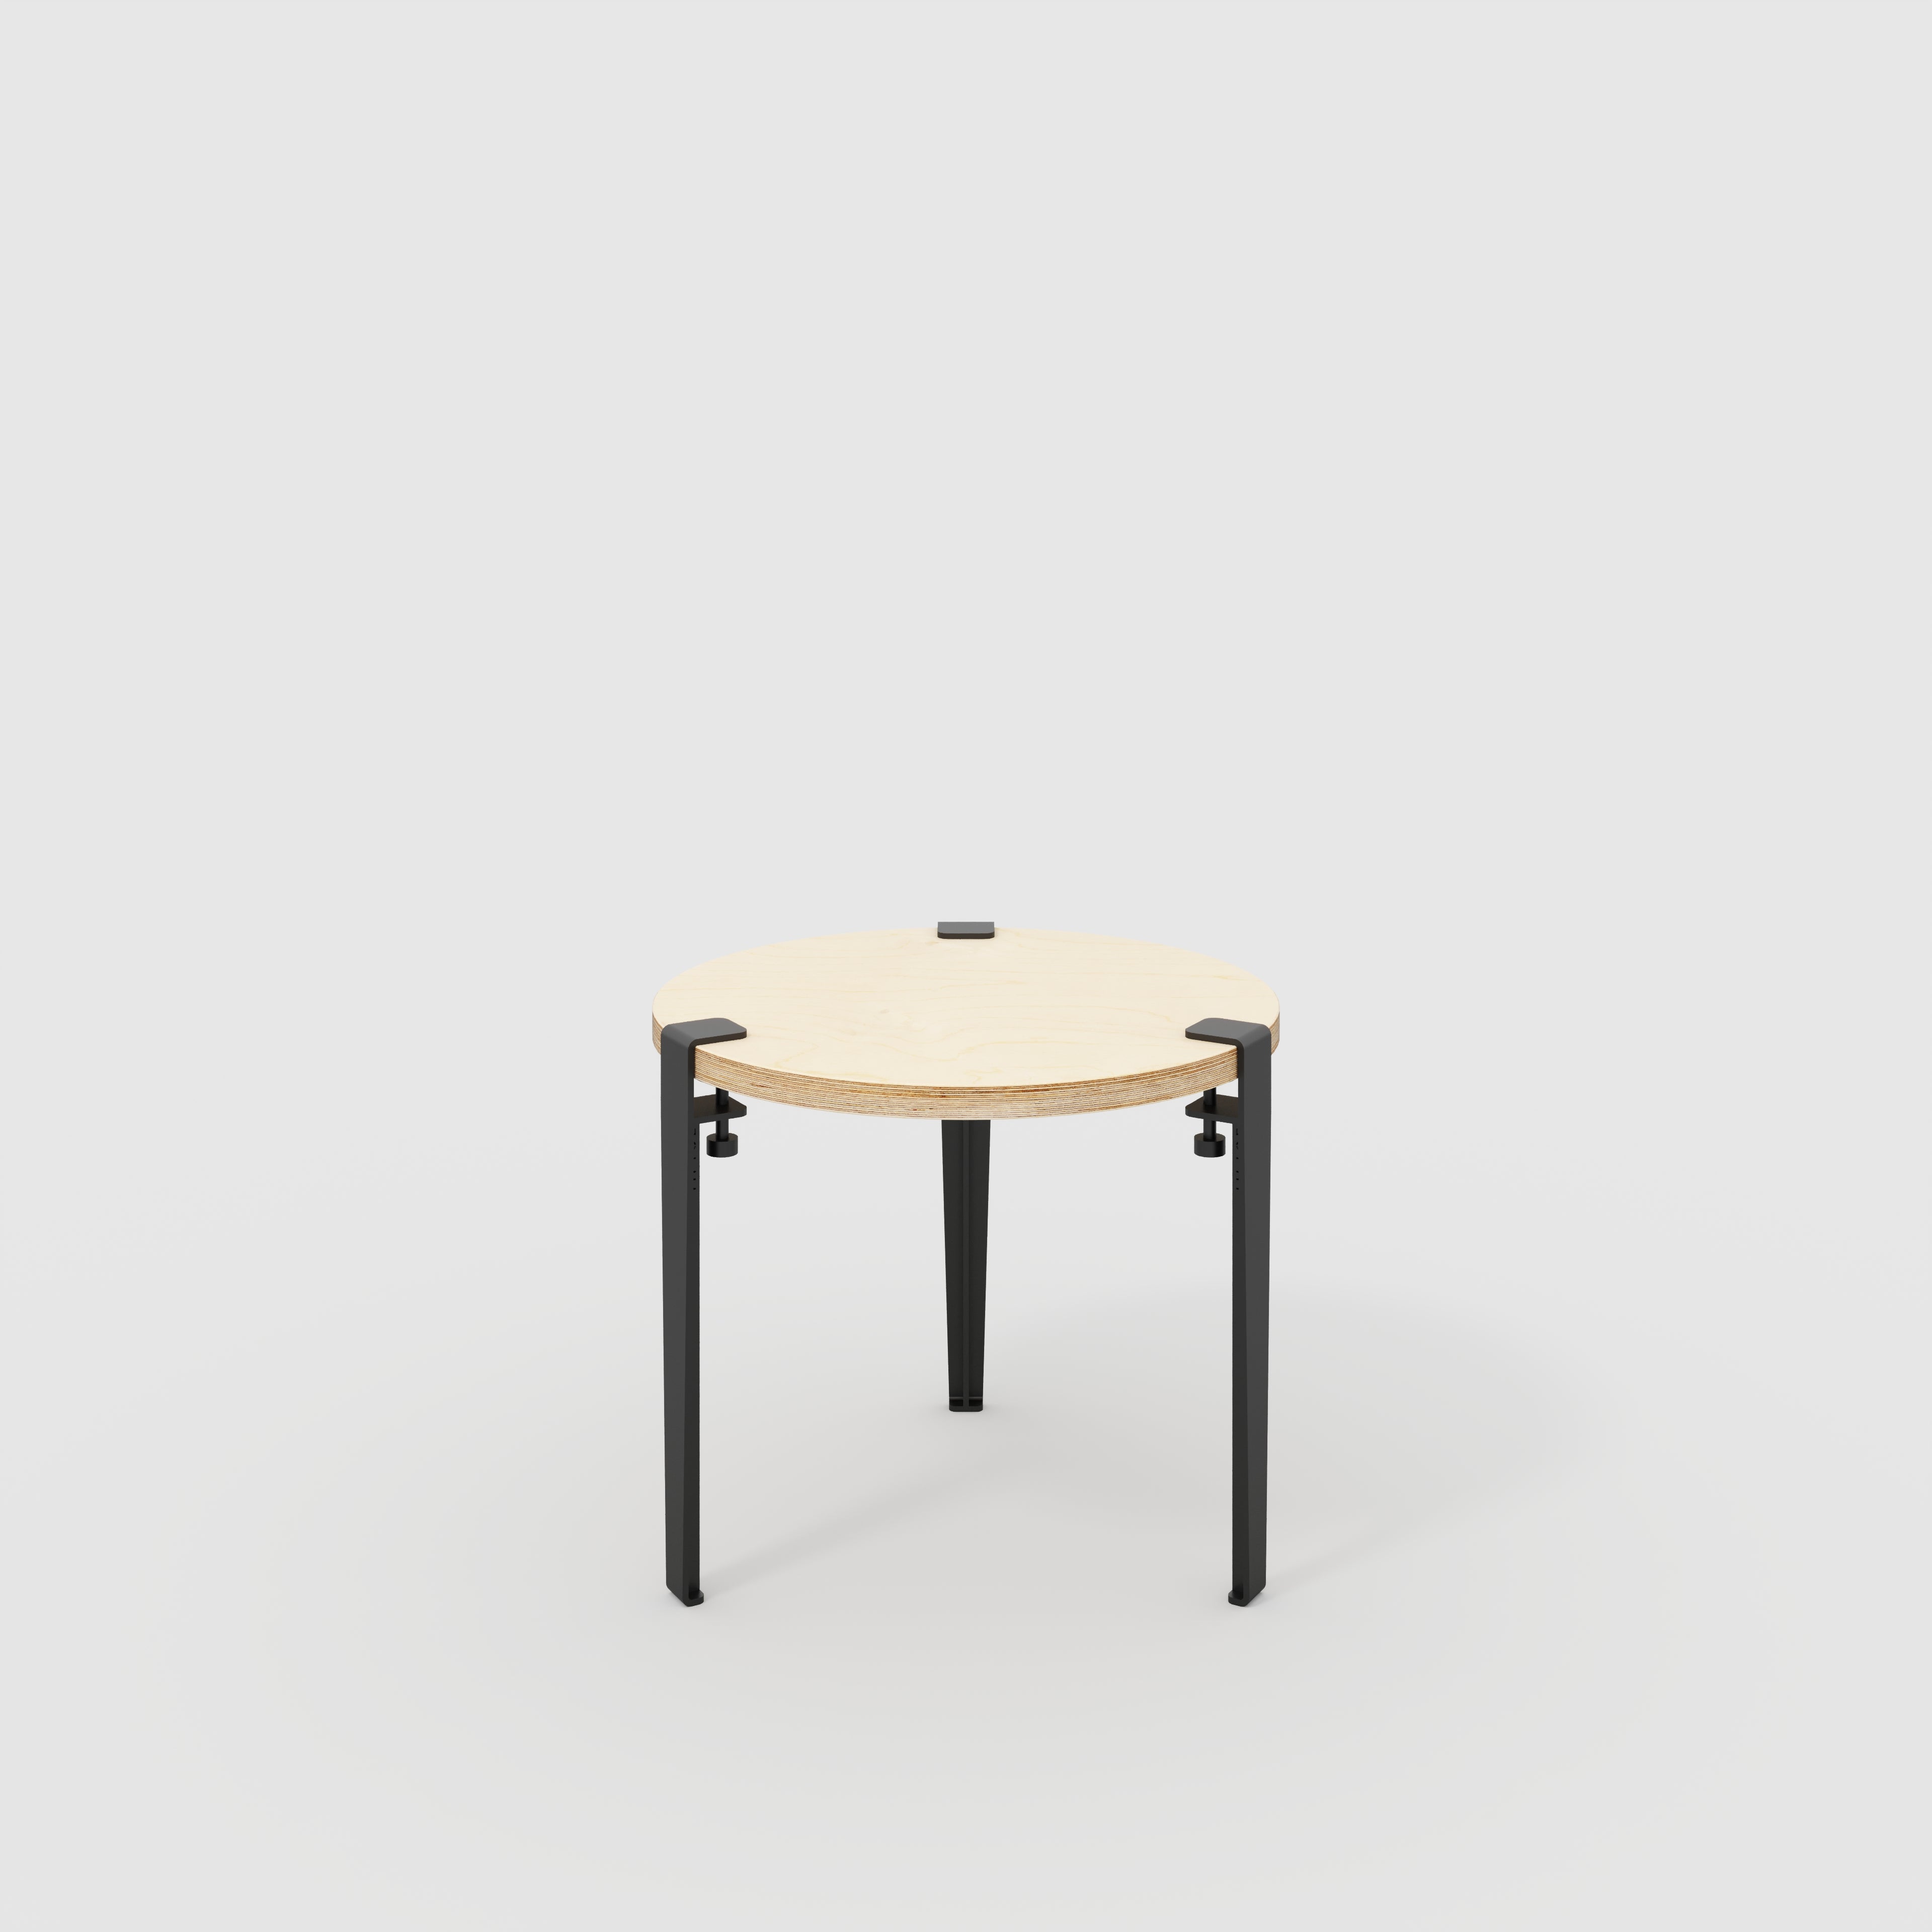 Round Side Table with Black Tiptoe Legs - Plywood Birch - 500(dia) x 430(h)